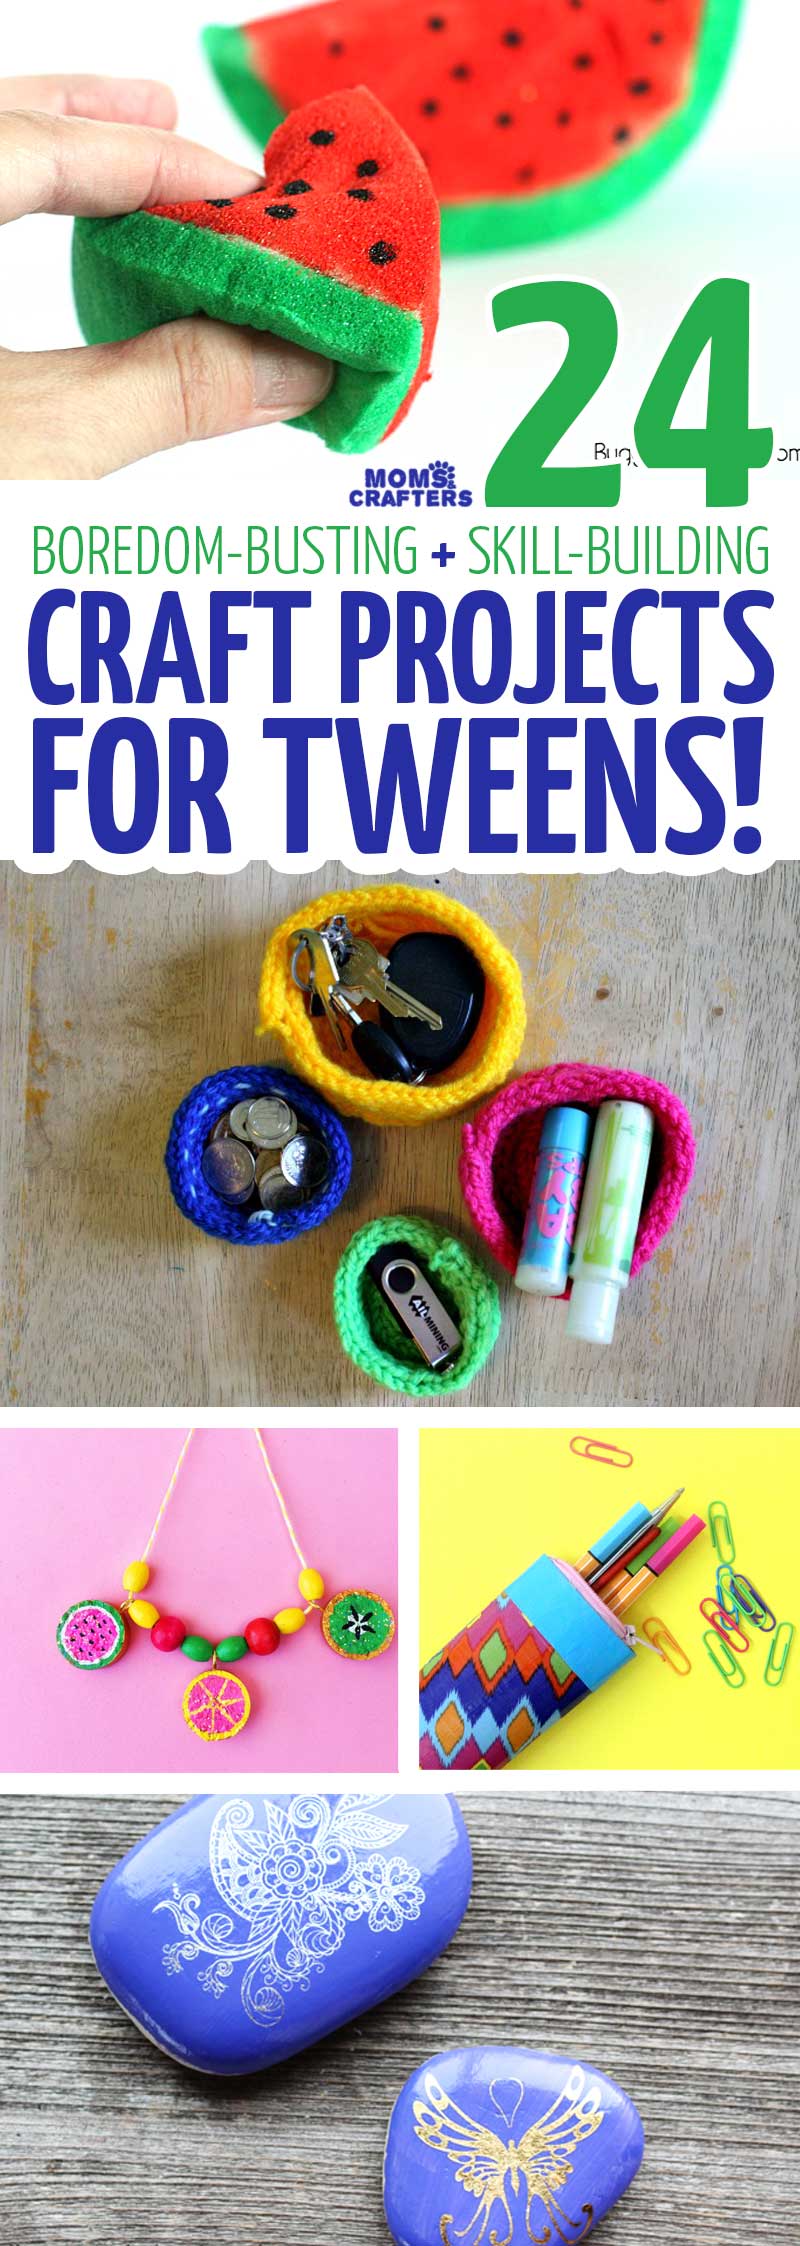 50 Cheap Crafts That Are Actually Cool - Teen Crafts